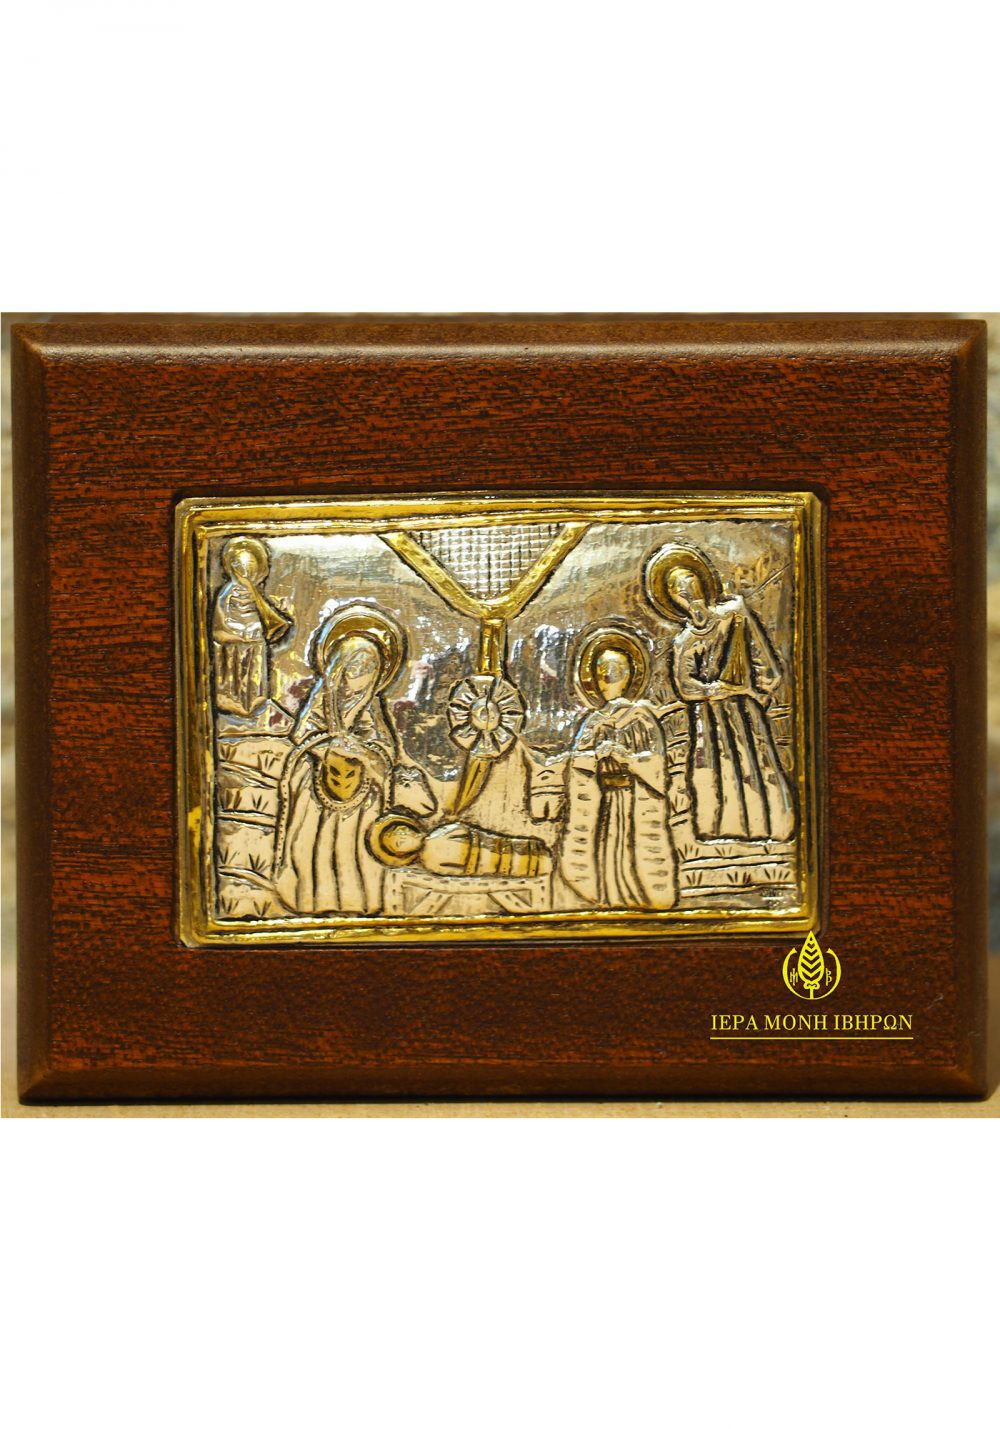 “Nativity of Christ “ - copy of detail of a reliquary